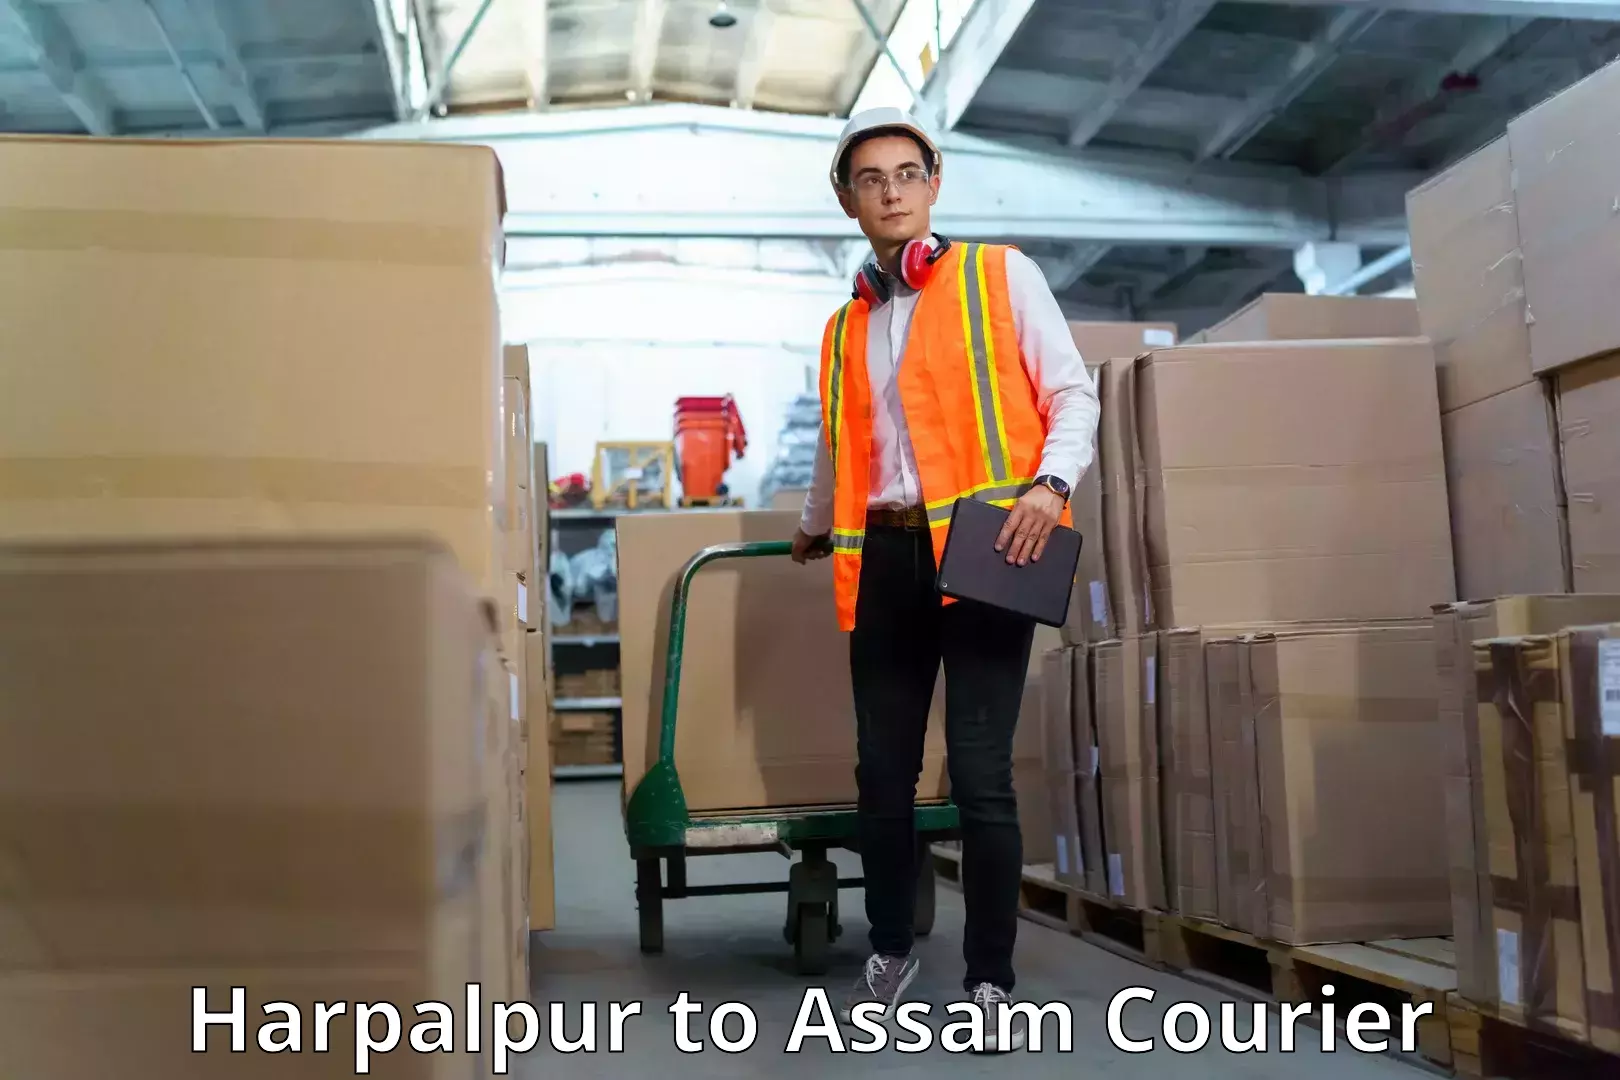 Courier service partnerships Harpalpur to Assam